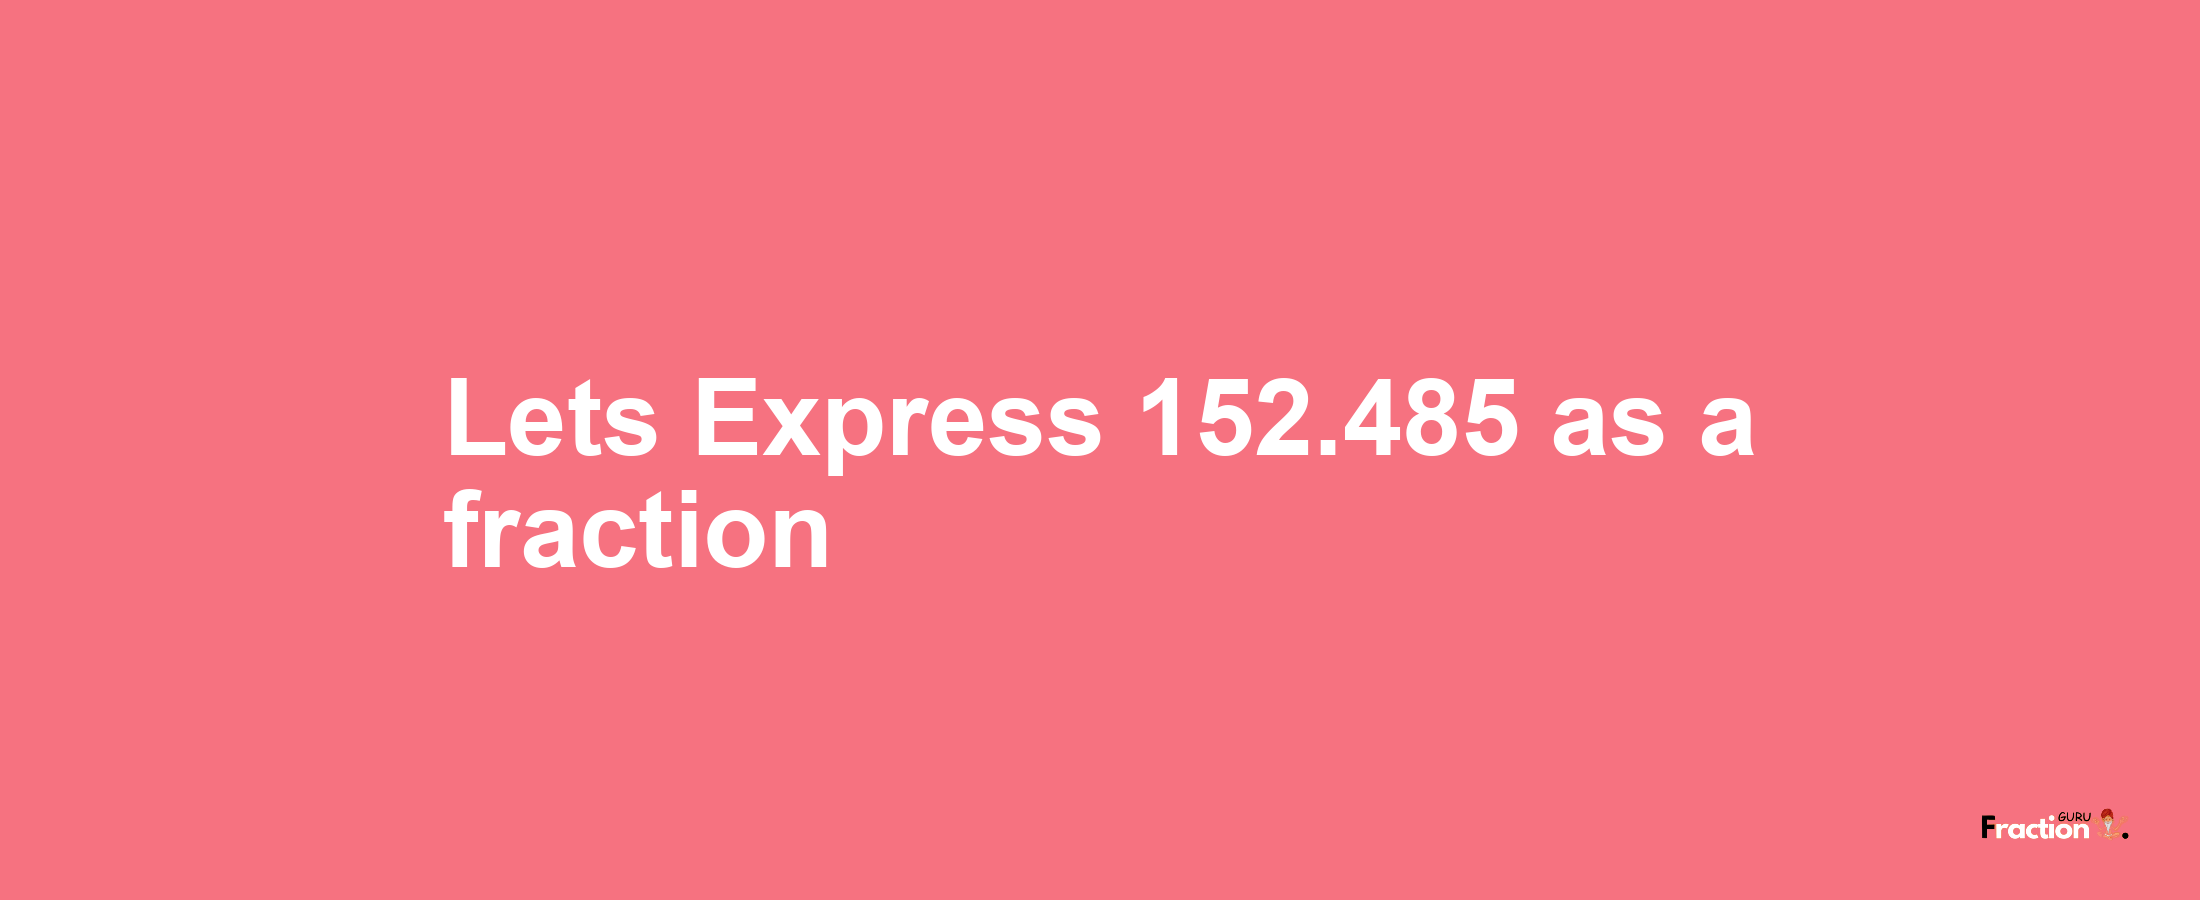 Lets Express 152.485 as afraction